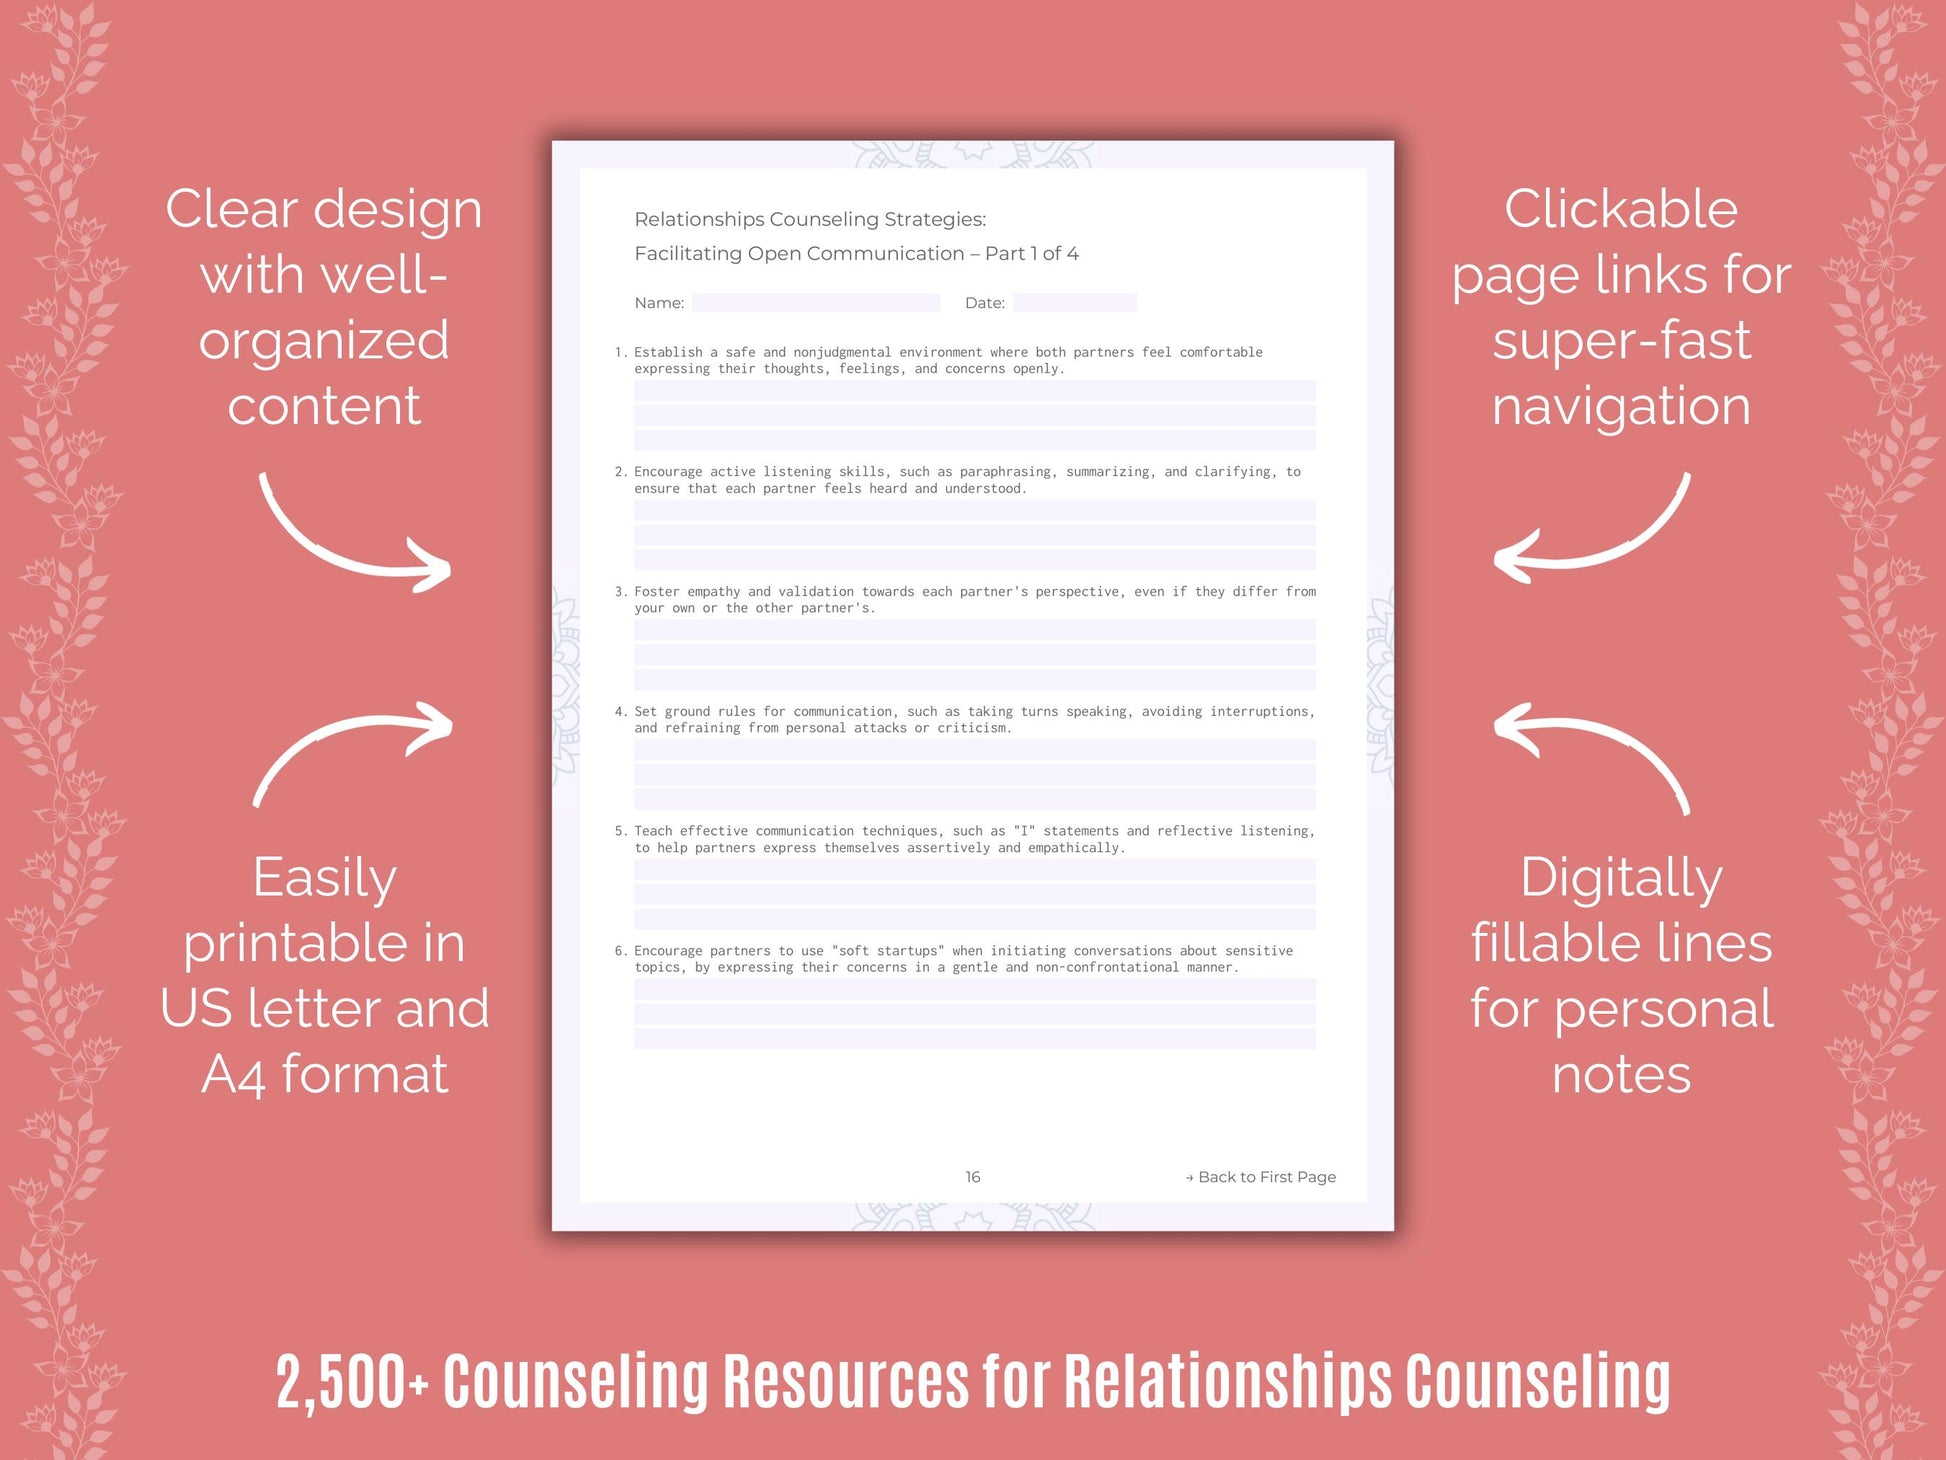 Mental Health, Relationships Idea, Relationships Tool, Template, Counselor, Counseling, Relationships, Therapist, Worksheet, Resource, Workbook, Relationships Bundle, Therapy